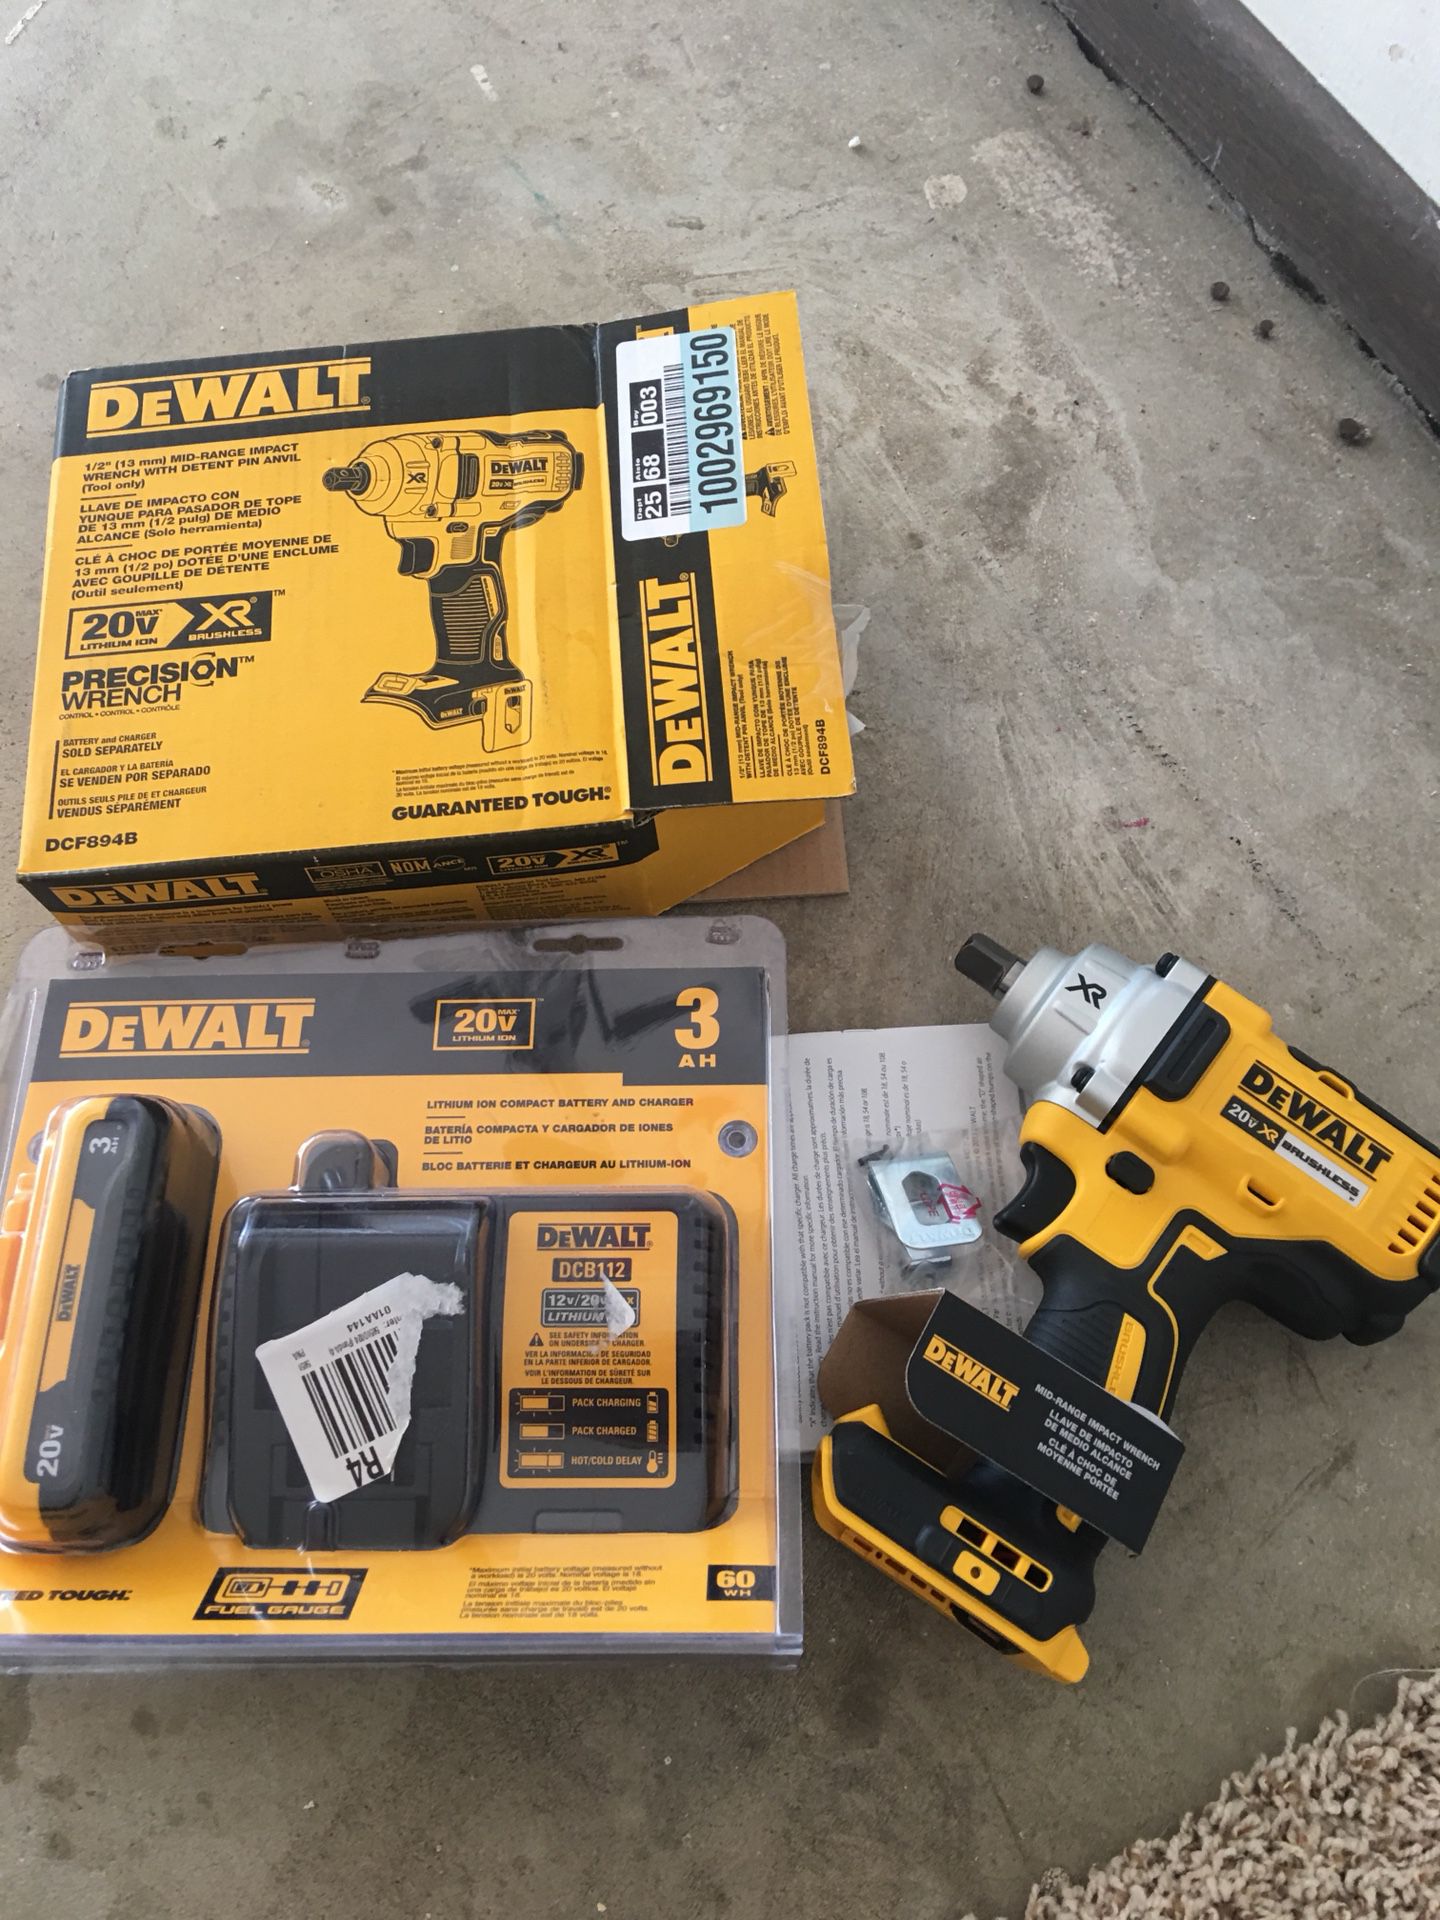 DEWALT 20-Volt MAX XR Lithium-Ion Cordless Brushless 1/2 in. Impact Wrench with Detent Pin Anvil kit